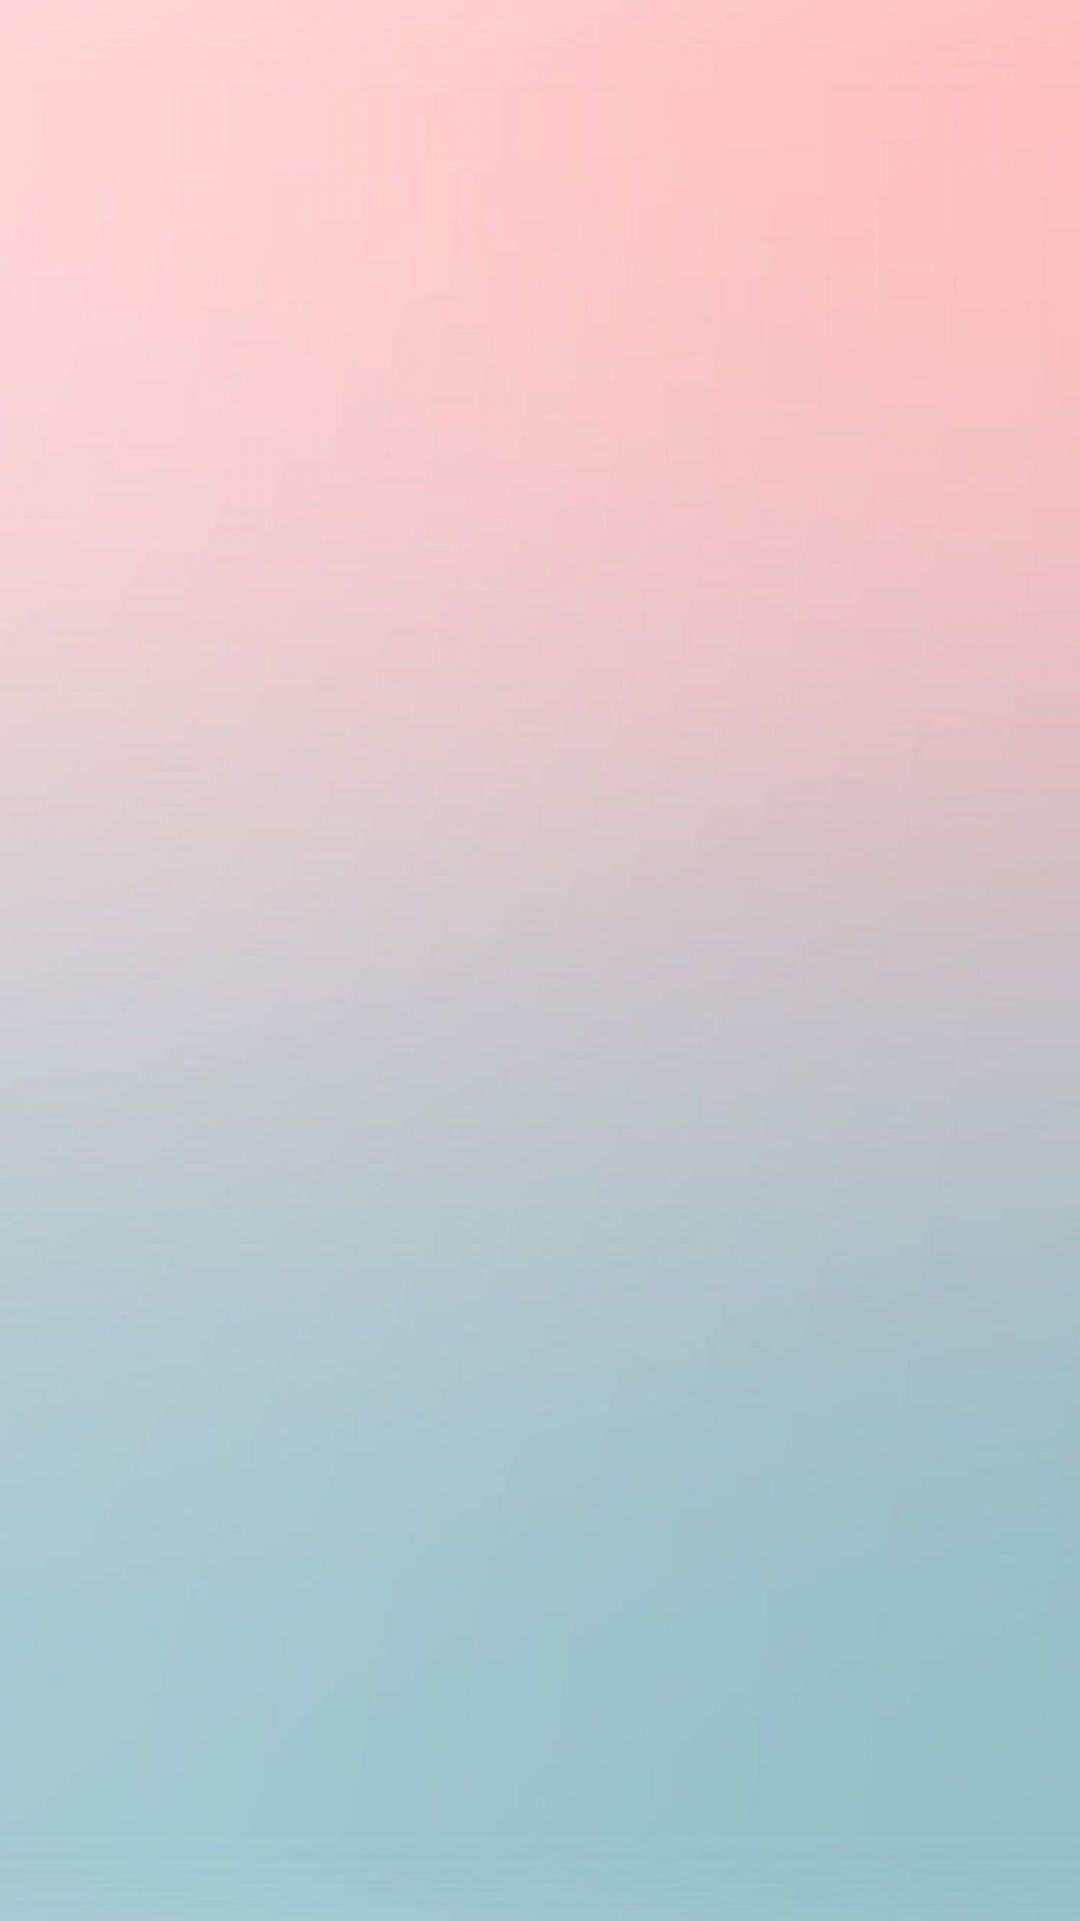 ✓[65+] iPhone wallpaper. pink blue soft pastel blur gradation - Android /  iPhone HD Wallpaper Background Download (png / jpg) (2023)